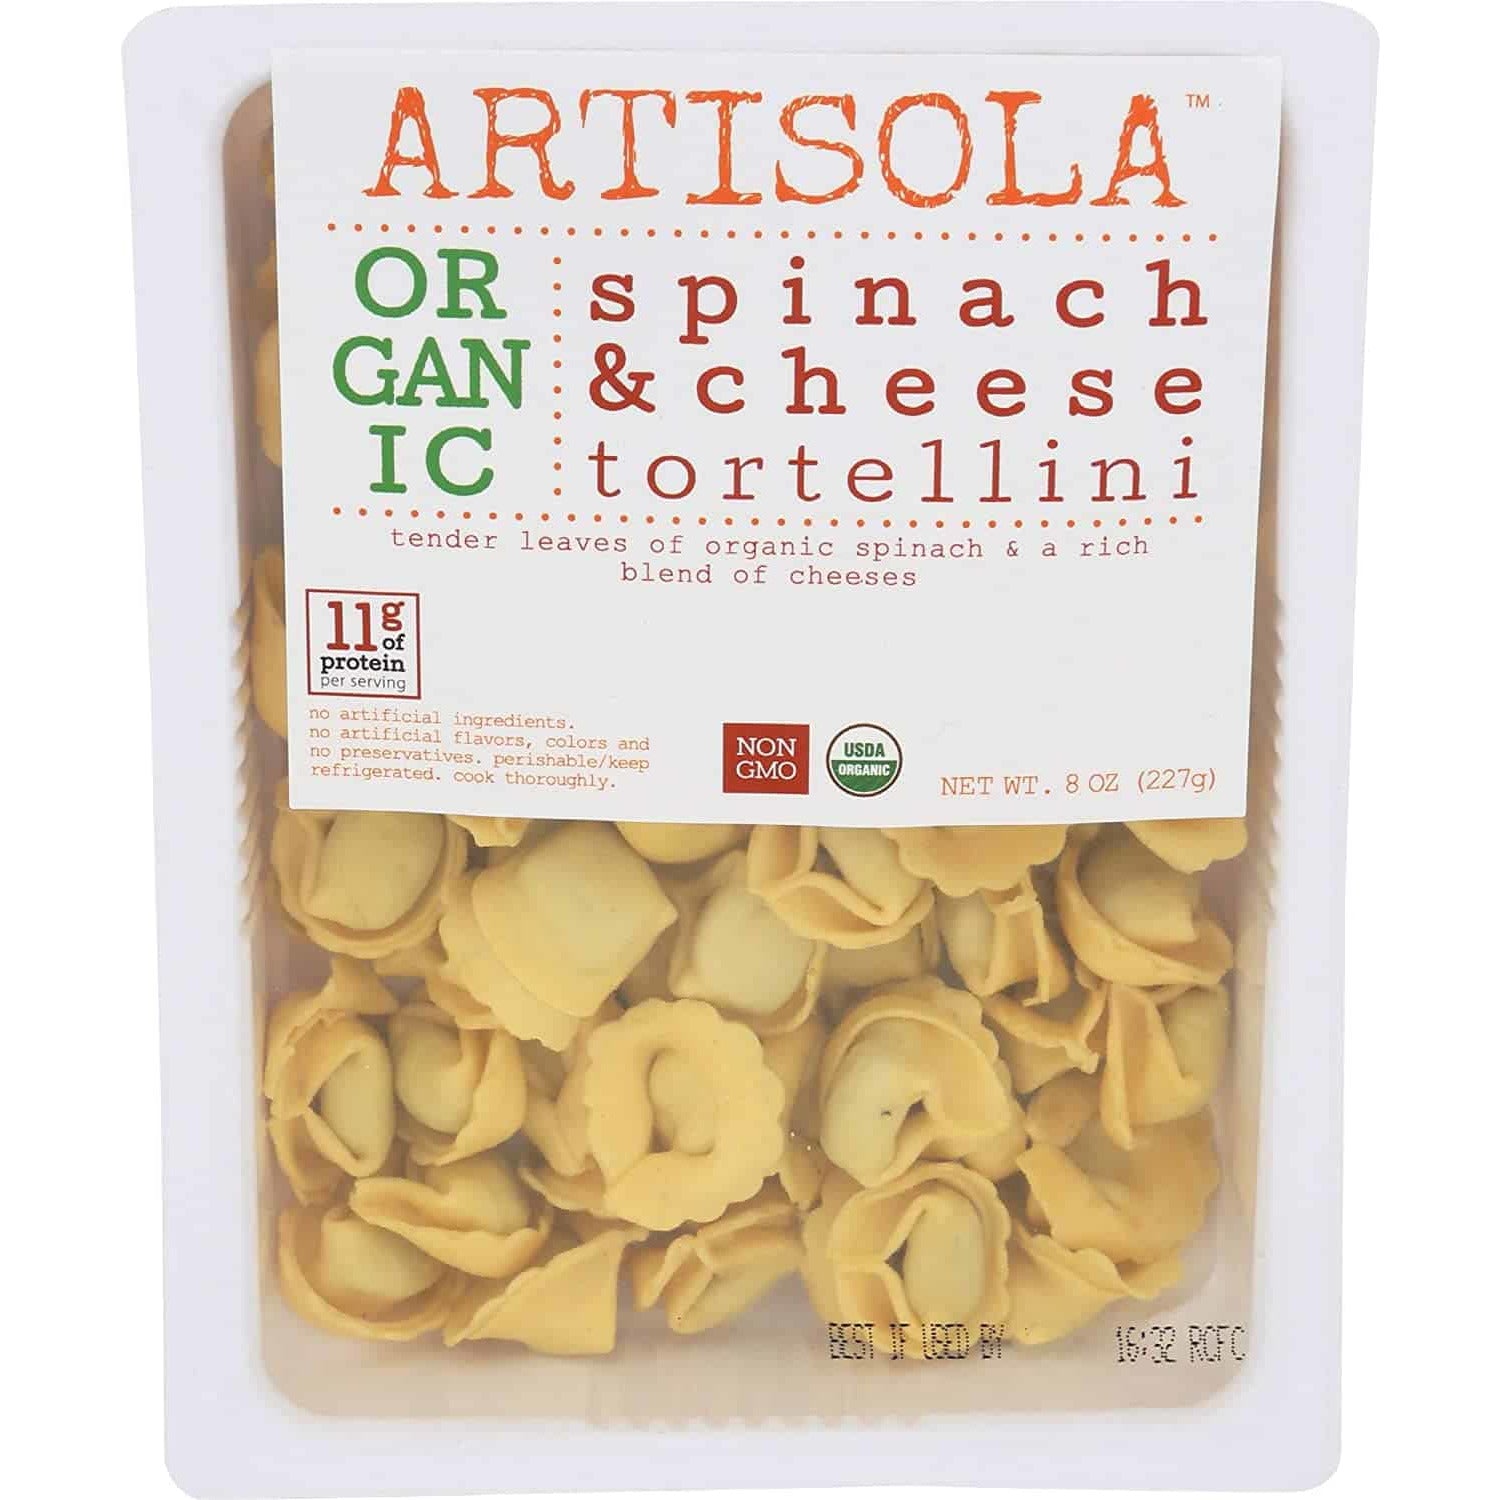 Oasis Fresh Artisola Organic Spinach and Cheese Tortellini 8 Oz.